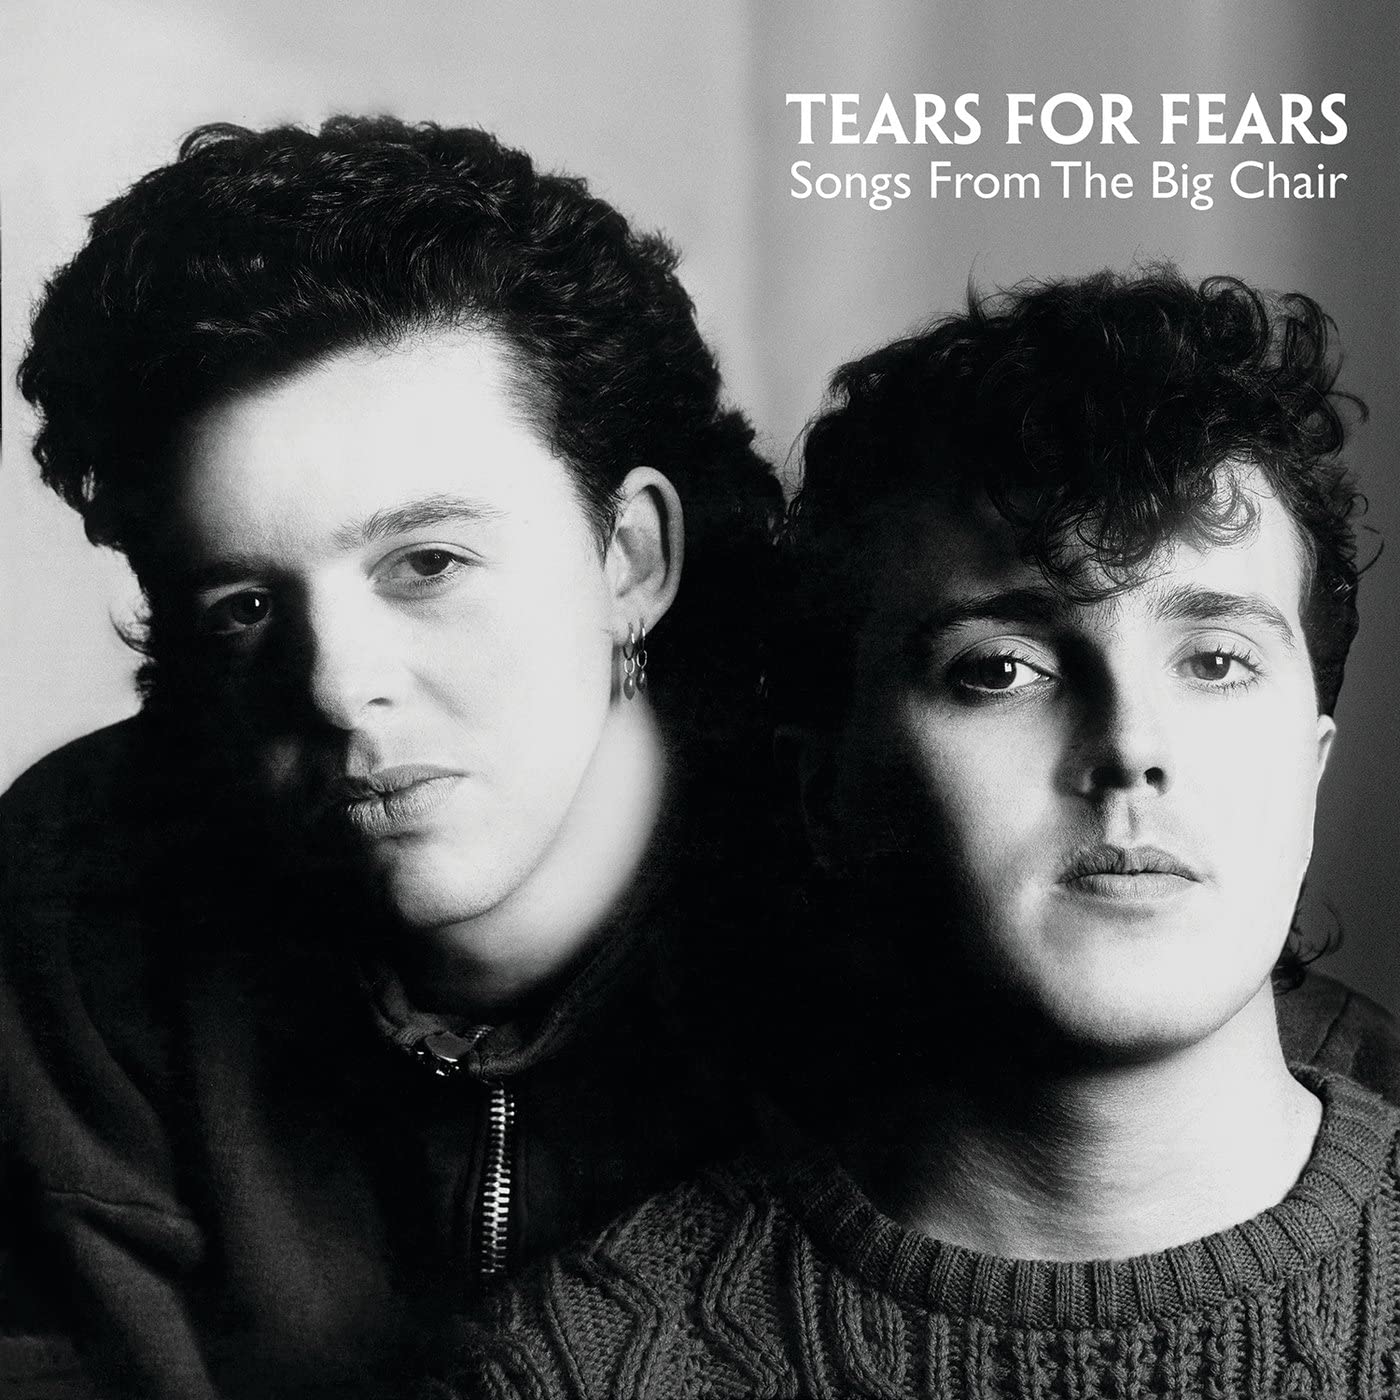 Tears For Fears - Songs From the Big Chair (Vinyl LP)